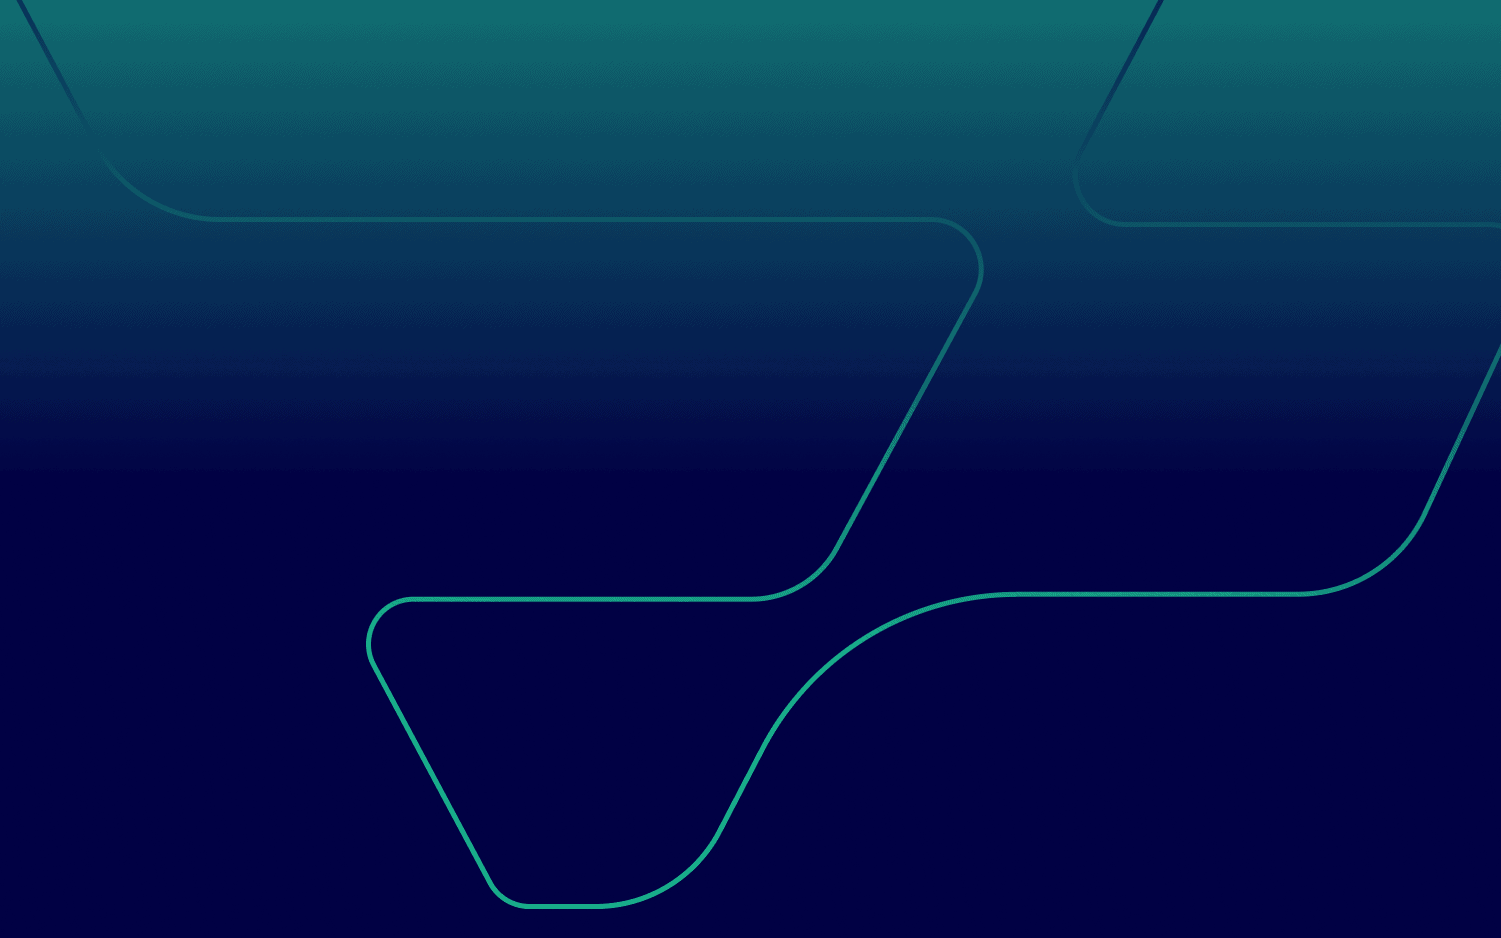 An abstract dark blue gradient background with neon light contour lines creating a sense of depth or layers.